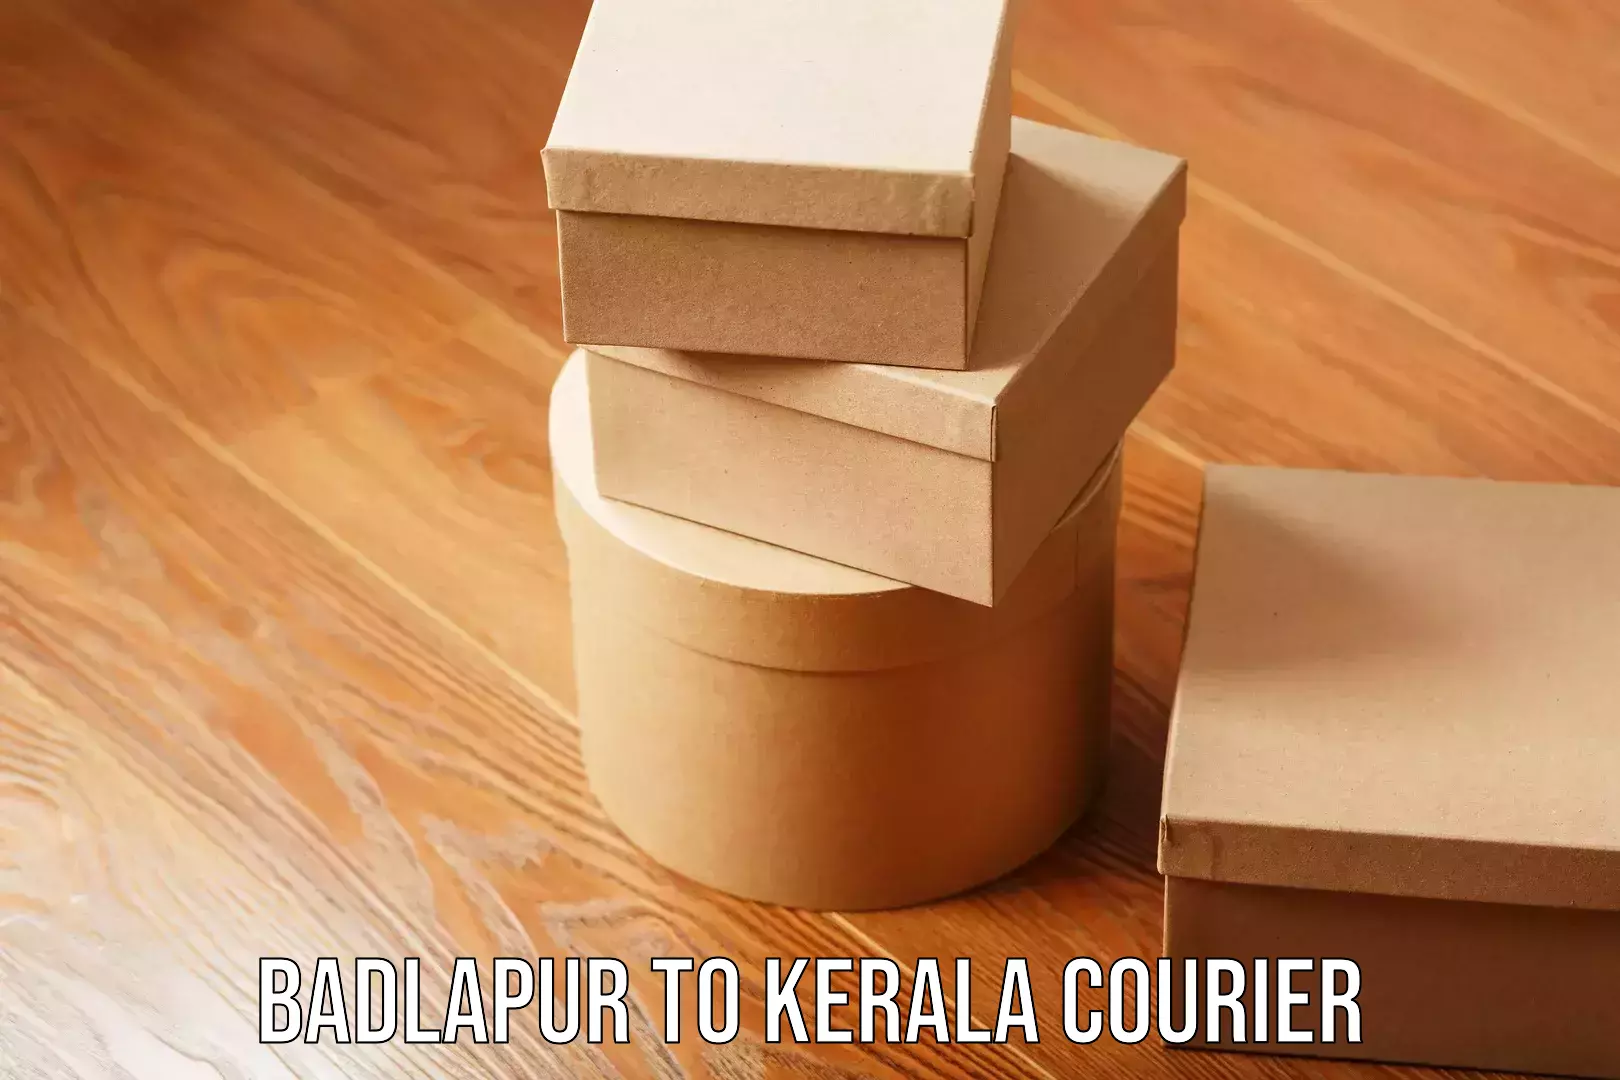 Same-day delivery solutions Badlapur to Kerala